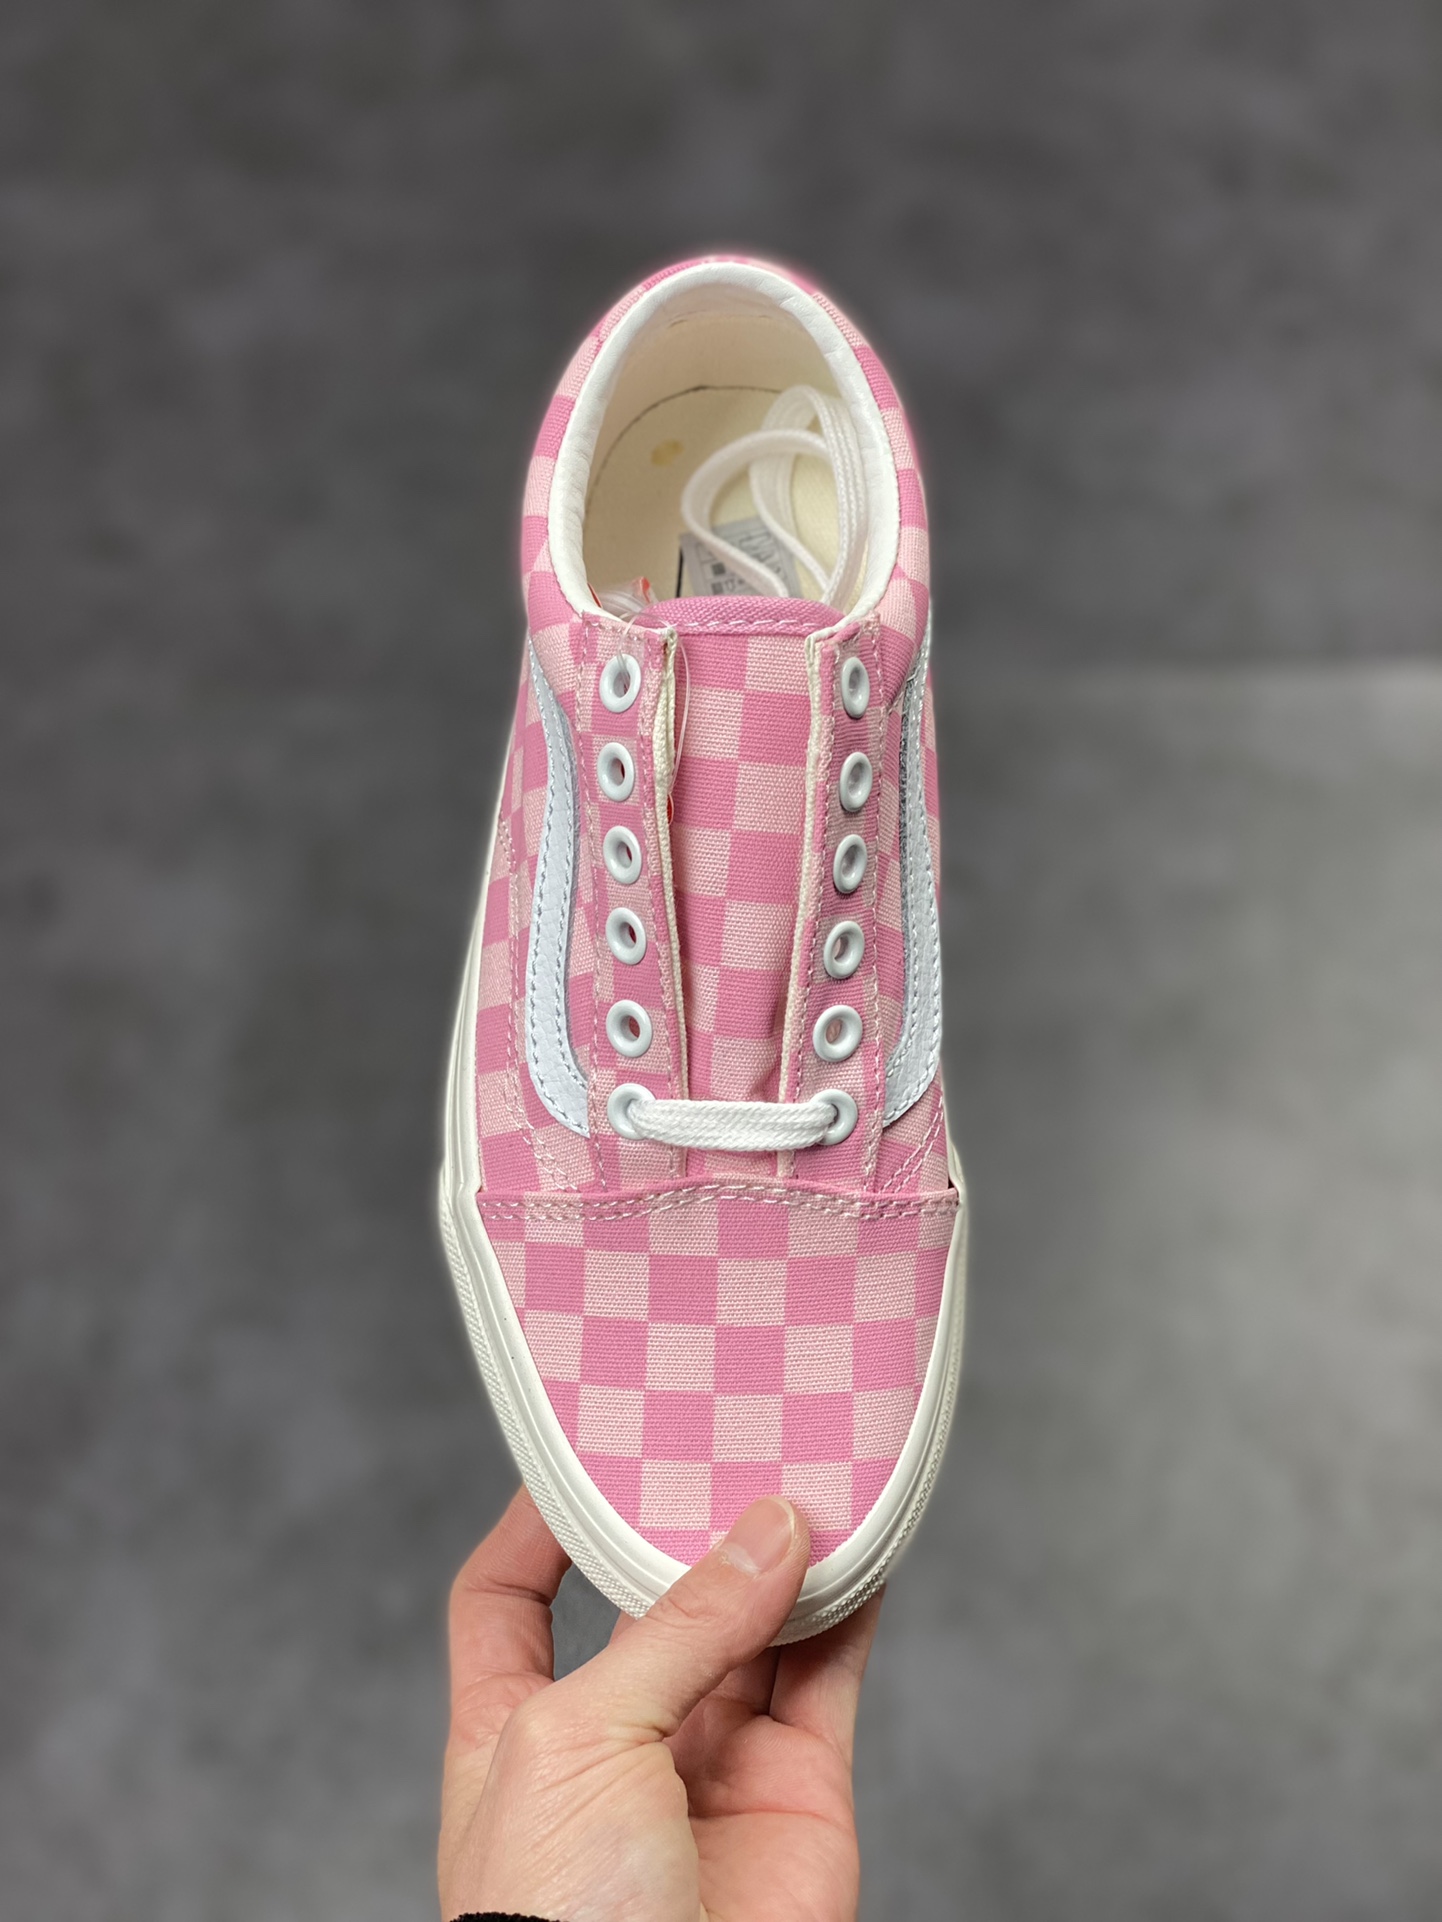 Vans Old Skool Vans official cherry blossom pink checkerboard sneakers canvas shoes VN0A7Q2JZY2